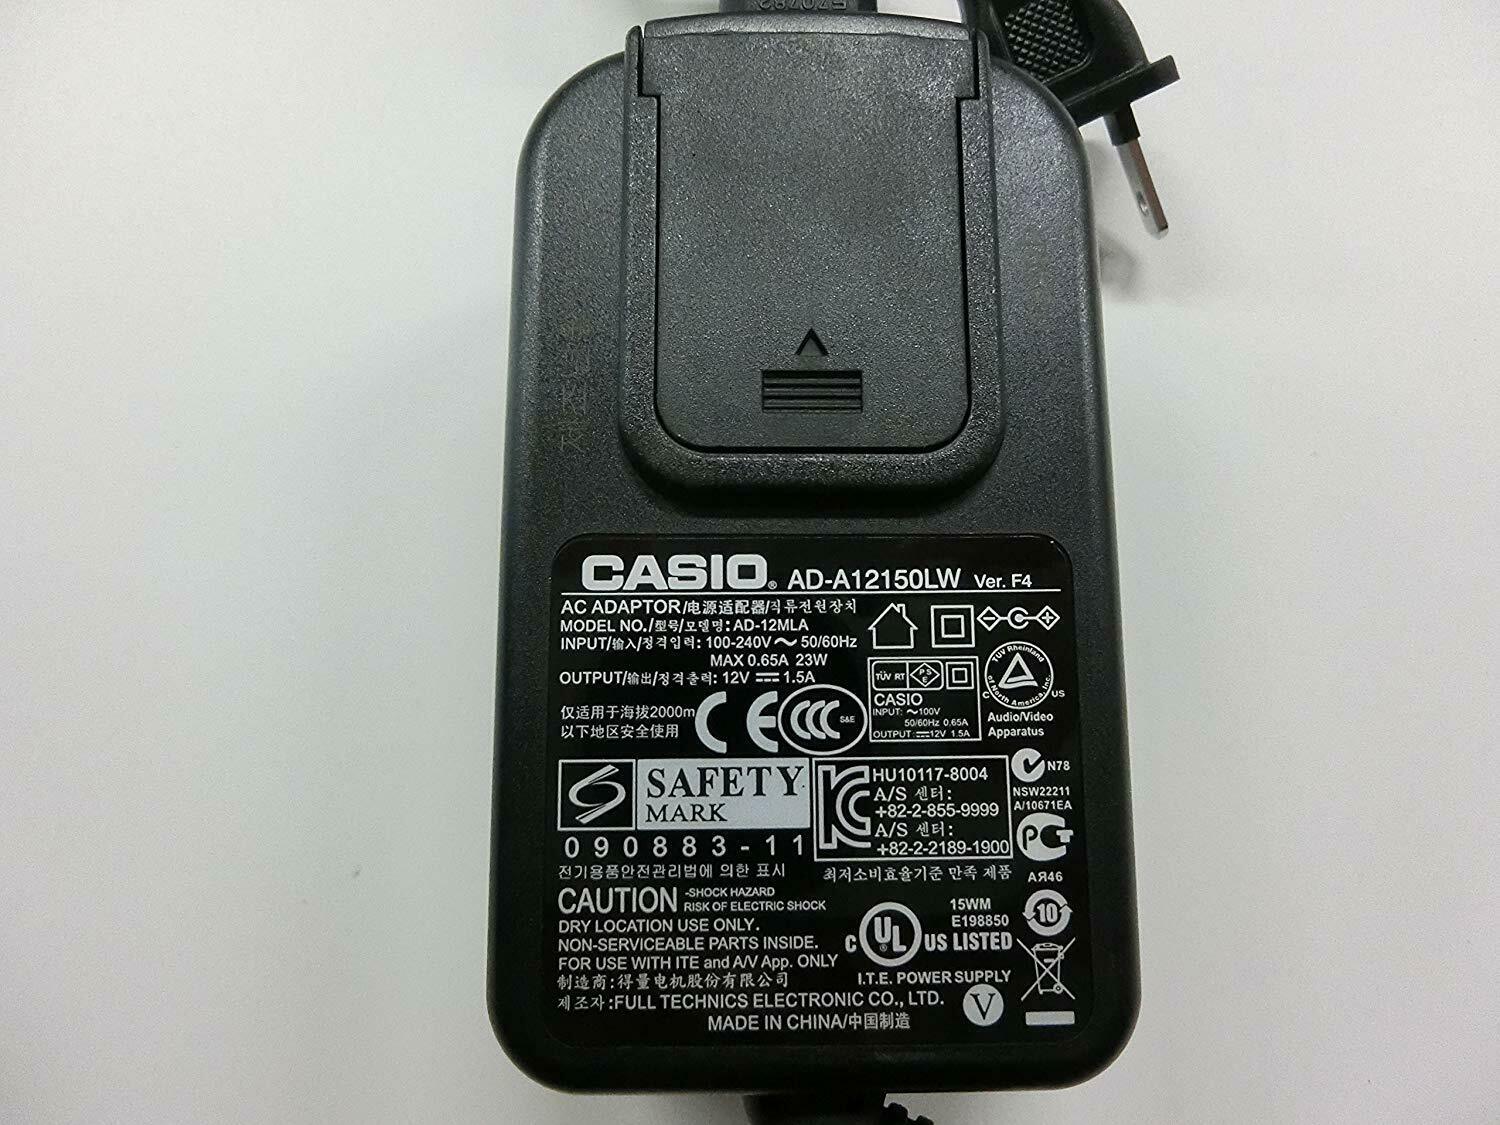 NEW 12V 1.5A Casio AD-A12150LW AD-12MLA AC Adapter - Click Image to Close